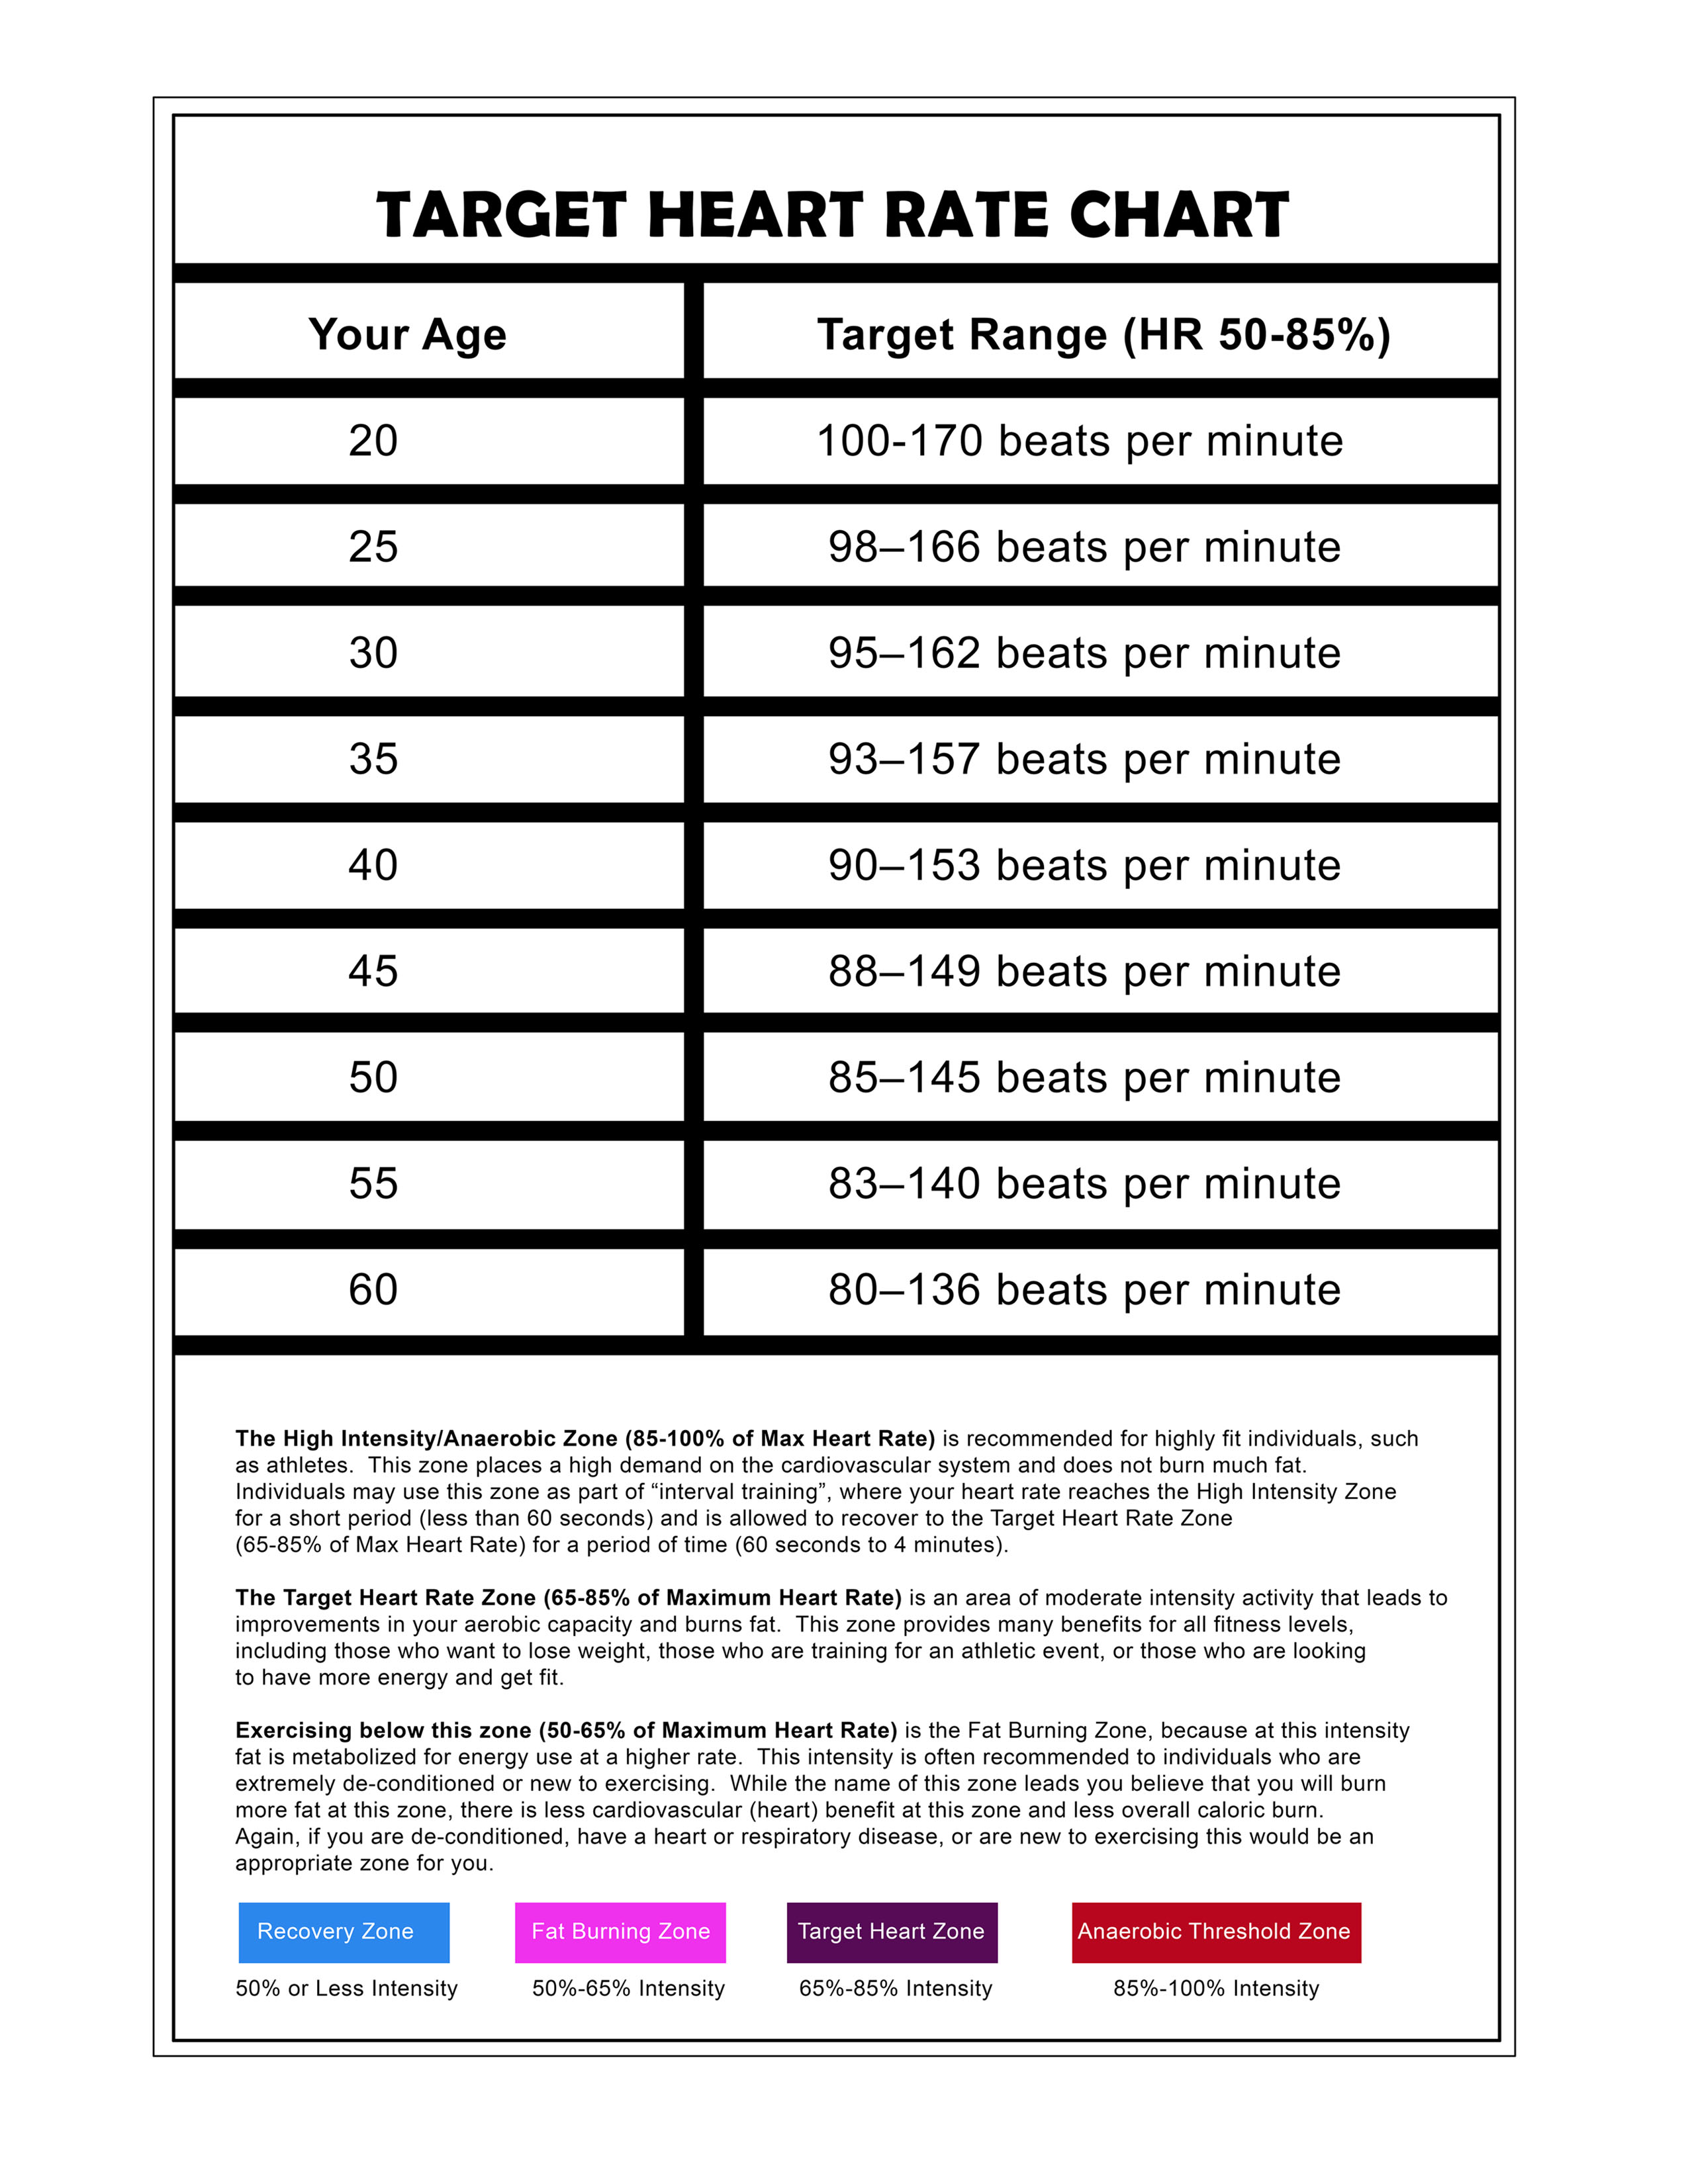 Printable target heart rate chart small 11 by 8.5 inches.